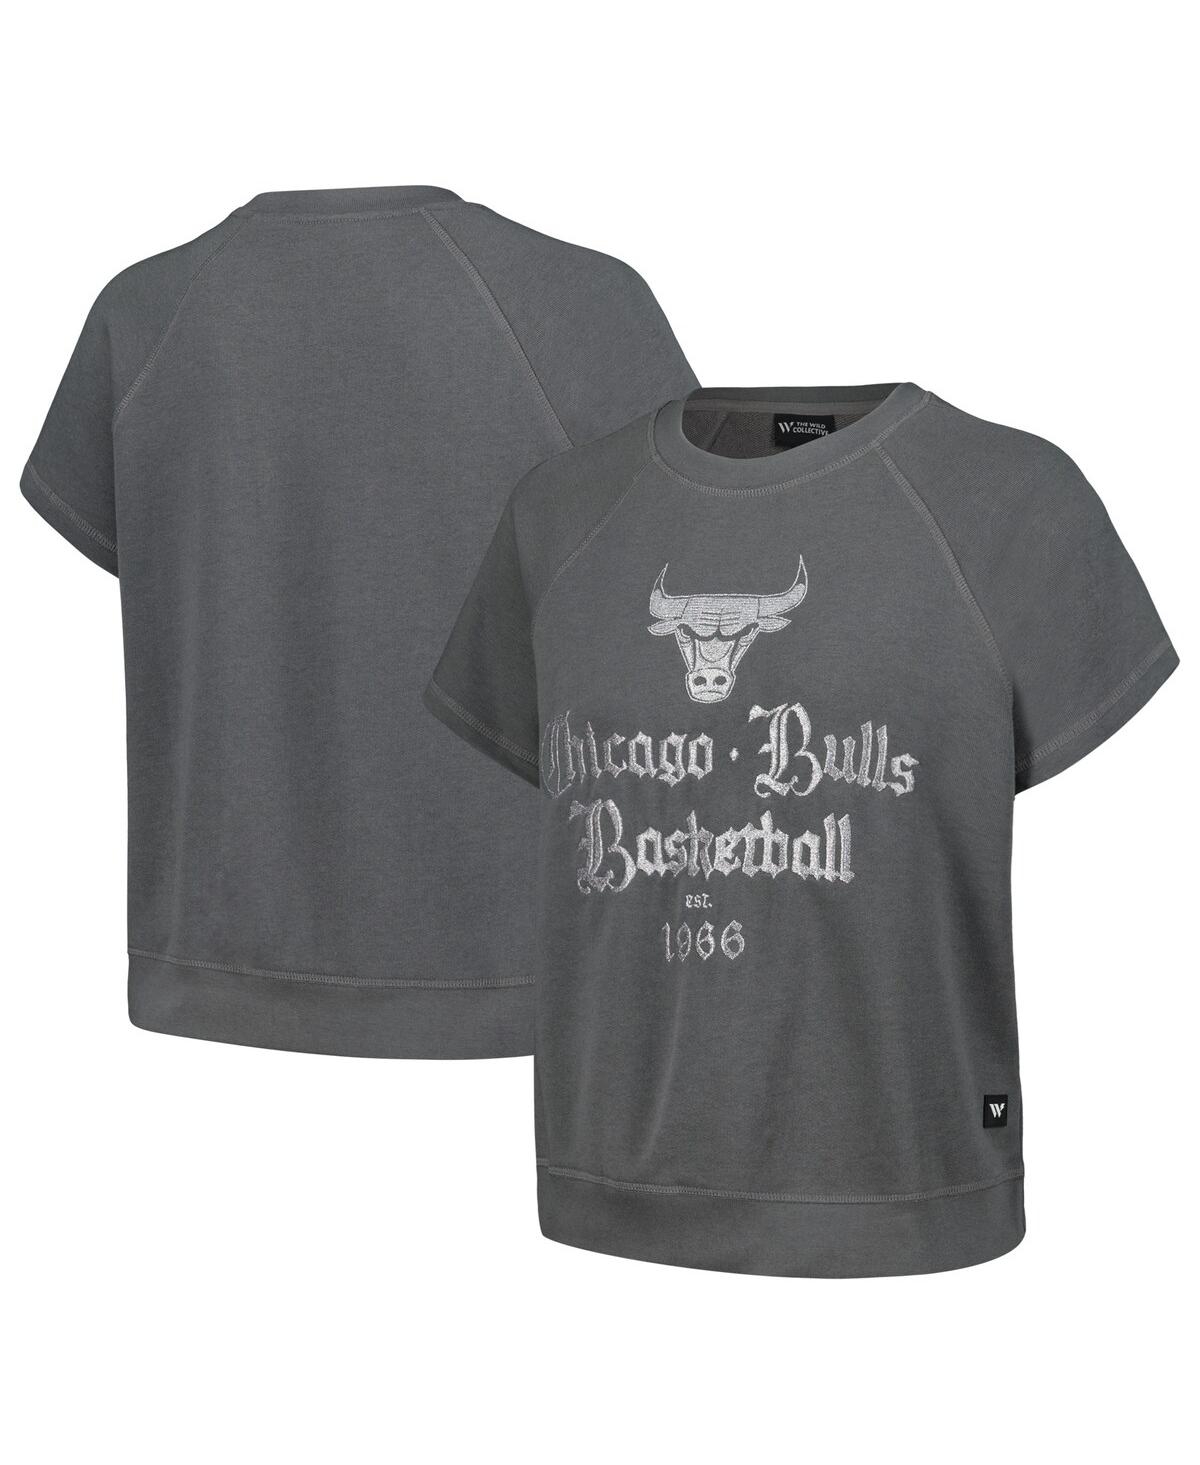 THE WILD COLLECTIVE WOMEN'S THE WILD COLLECTIVE GRAY CHICAGO BULLS EMBROIDERED FLEECE RAGLAN SHORT SLEEVE PULLOVER SWEAT